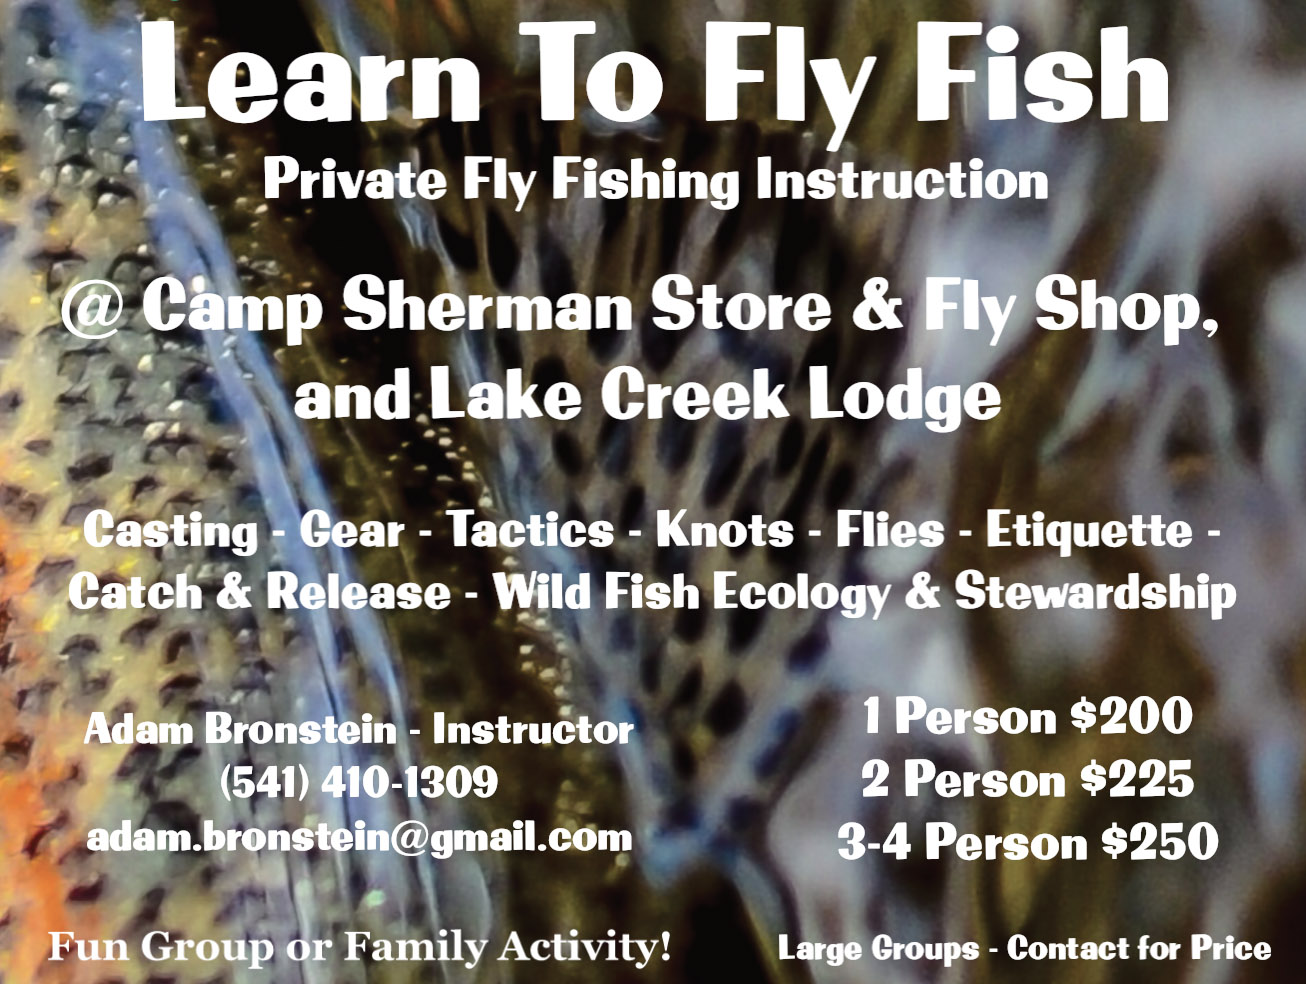 365 Fly-Fishing Tips for Trout, Bass, and Panfish Book by Skip